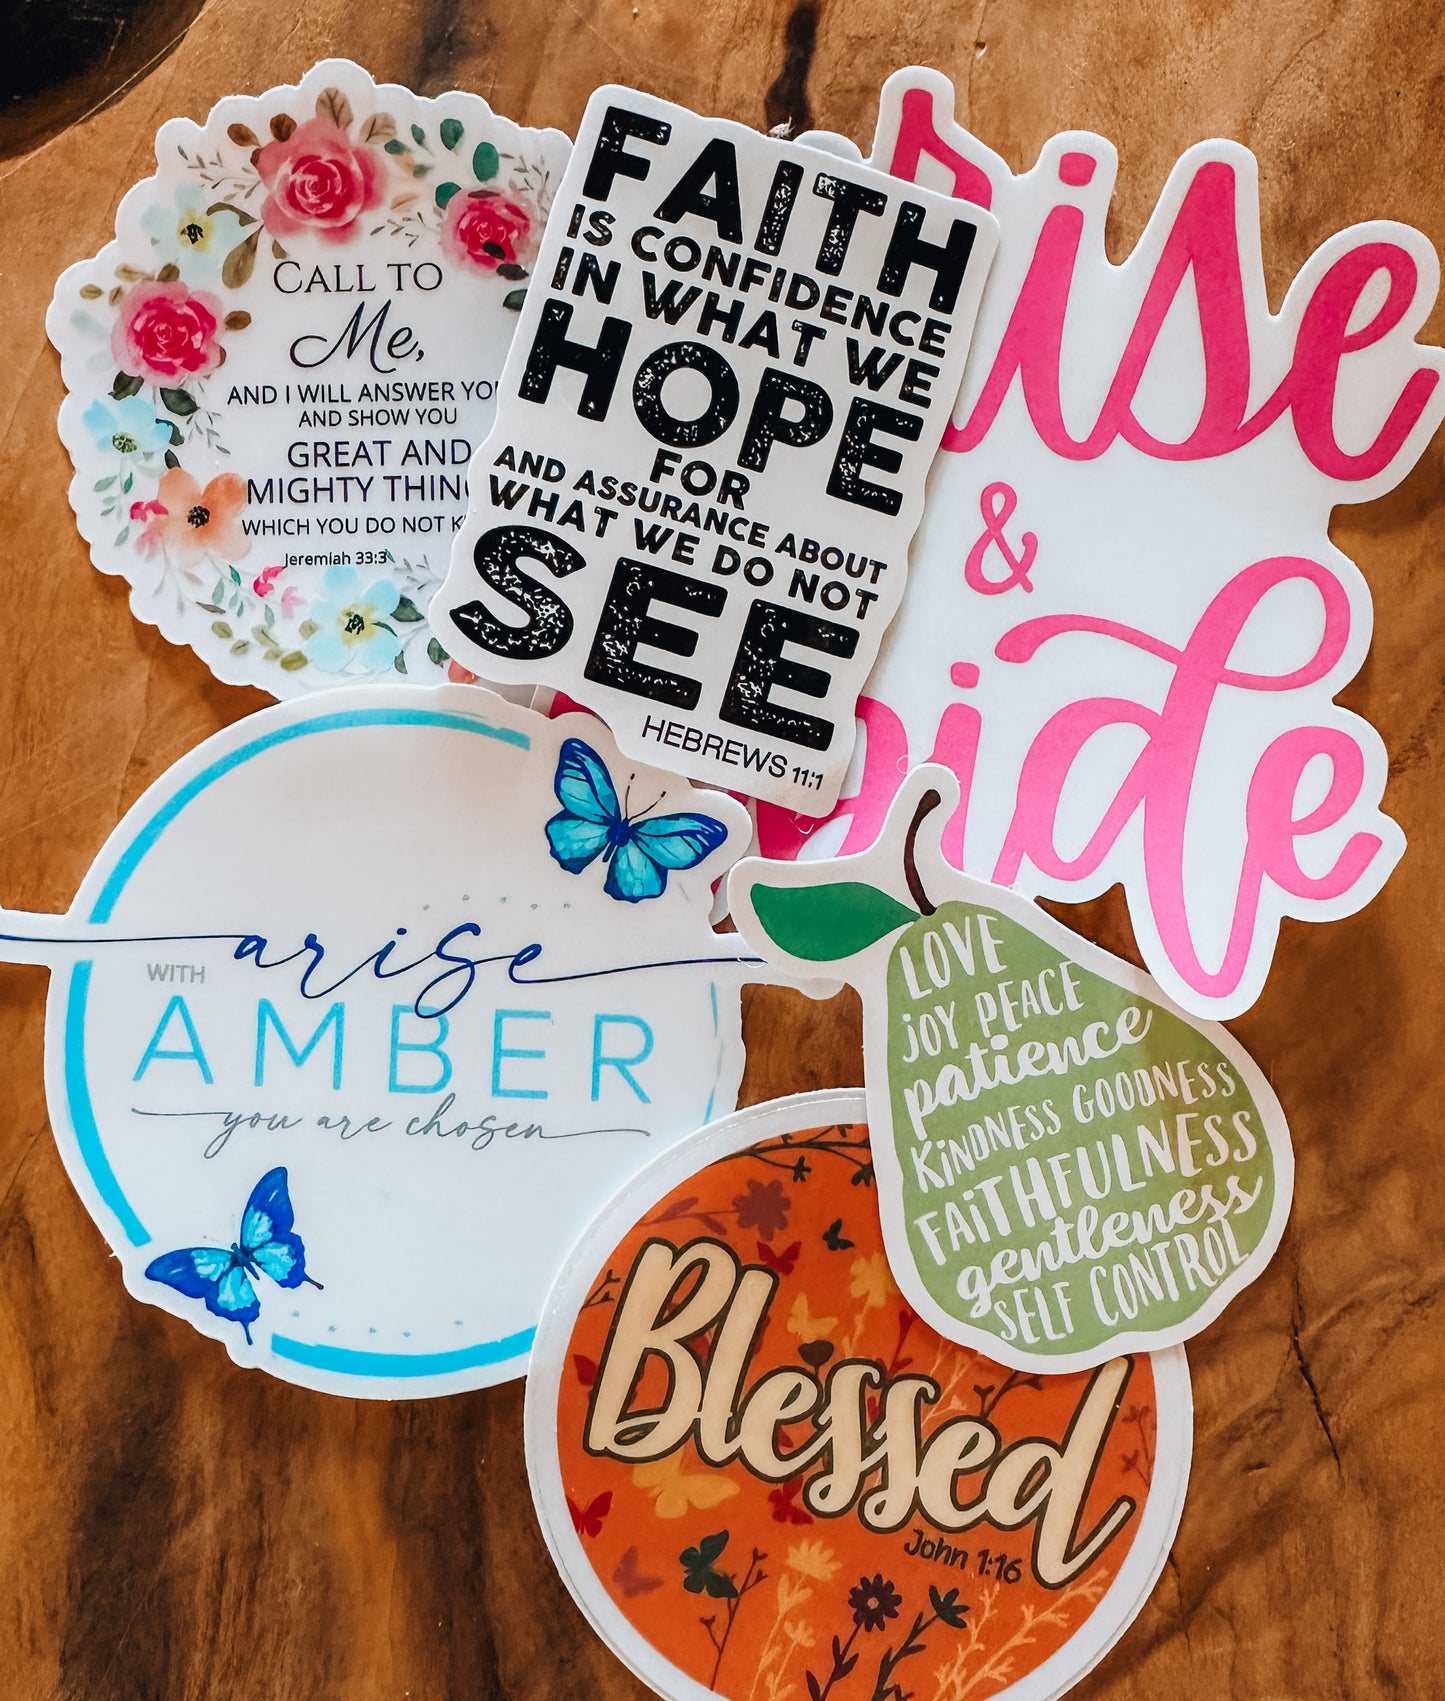 5 sticker pack - Arise with Amber (free with $100 purchase)